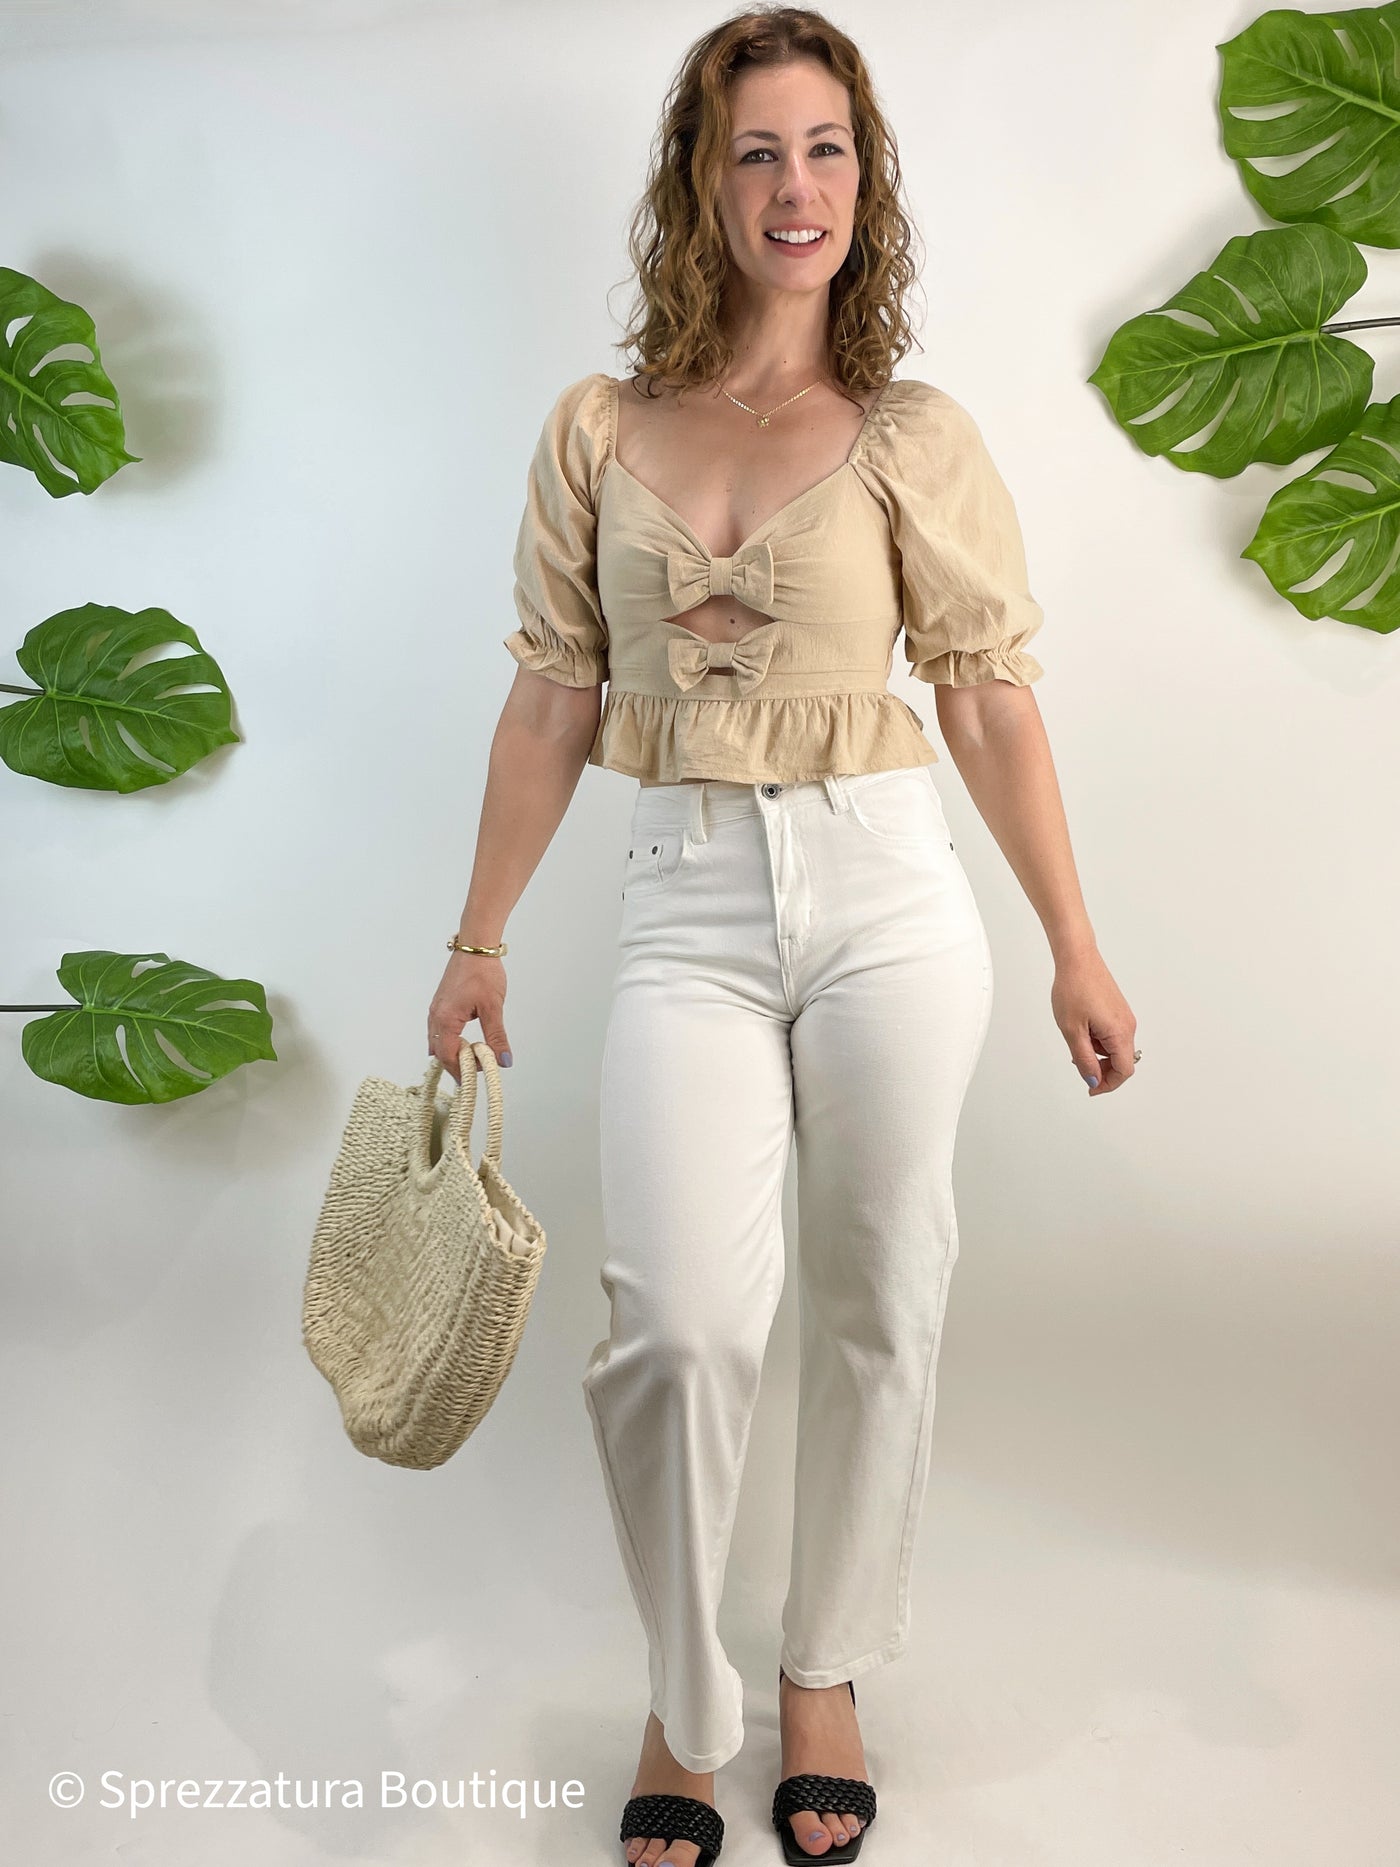 Neutral taupe color bow tie cut out detail blouse. Cropped top with ruffle adorable causal top with jeans or shorts. Natural color women's blouse for summer or fall with bows and ruffles. Cutout detail Zip up back detail and tie